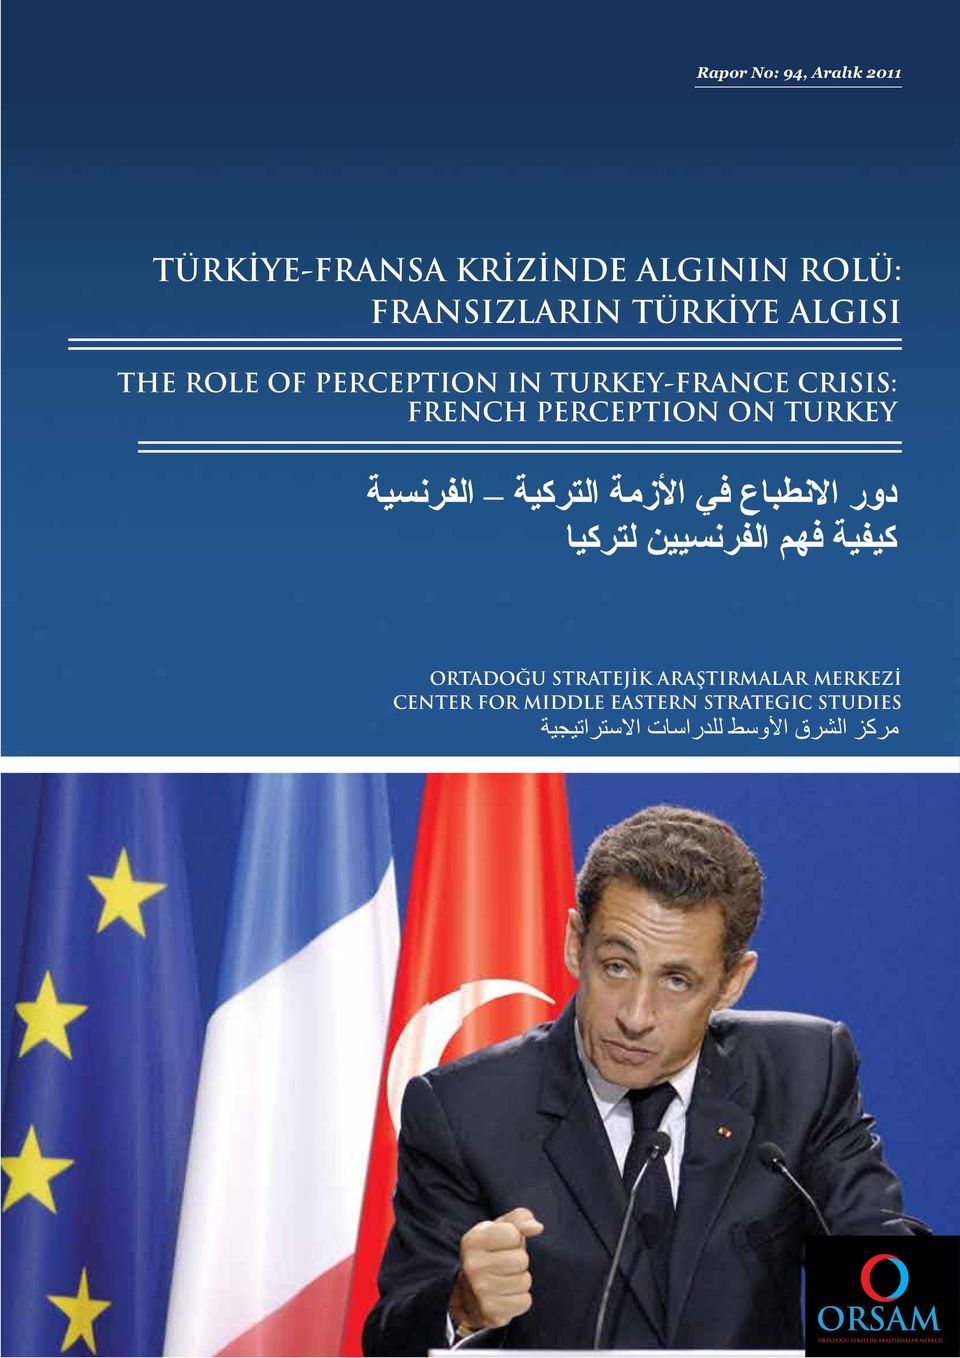 PERCEPTION IN TURKEY-FRANCE CRISIS: FRENCH